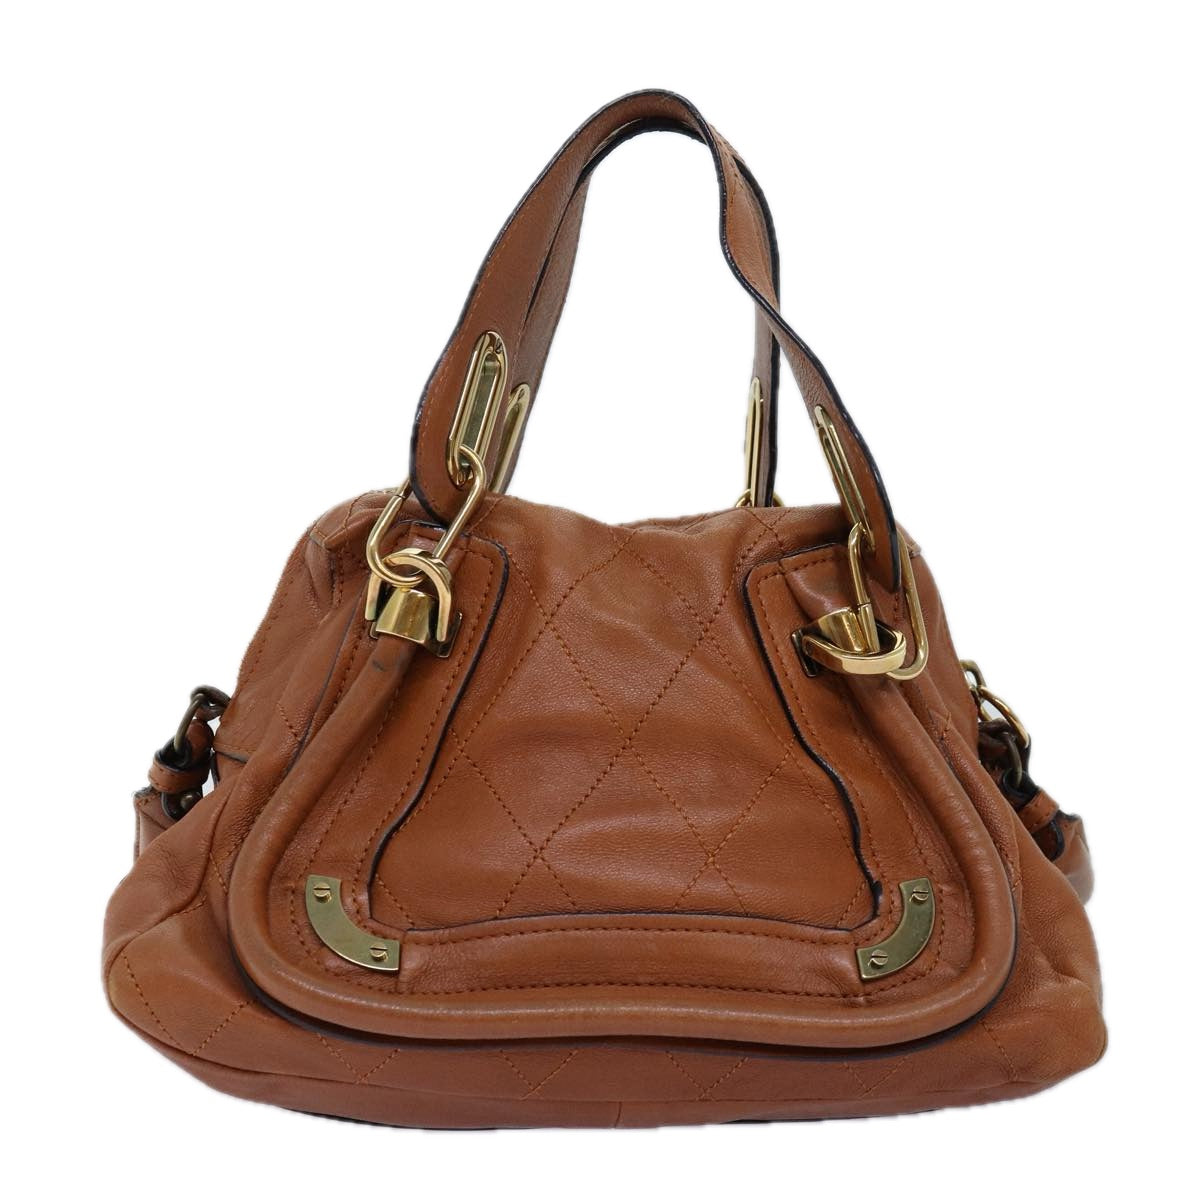 Chloe Paraty Hand Bag Leather 2way Brown Auth am6238 - 0